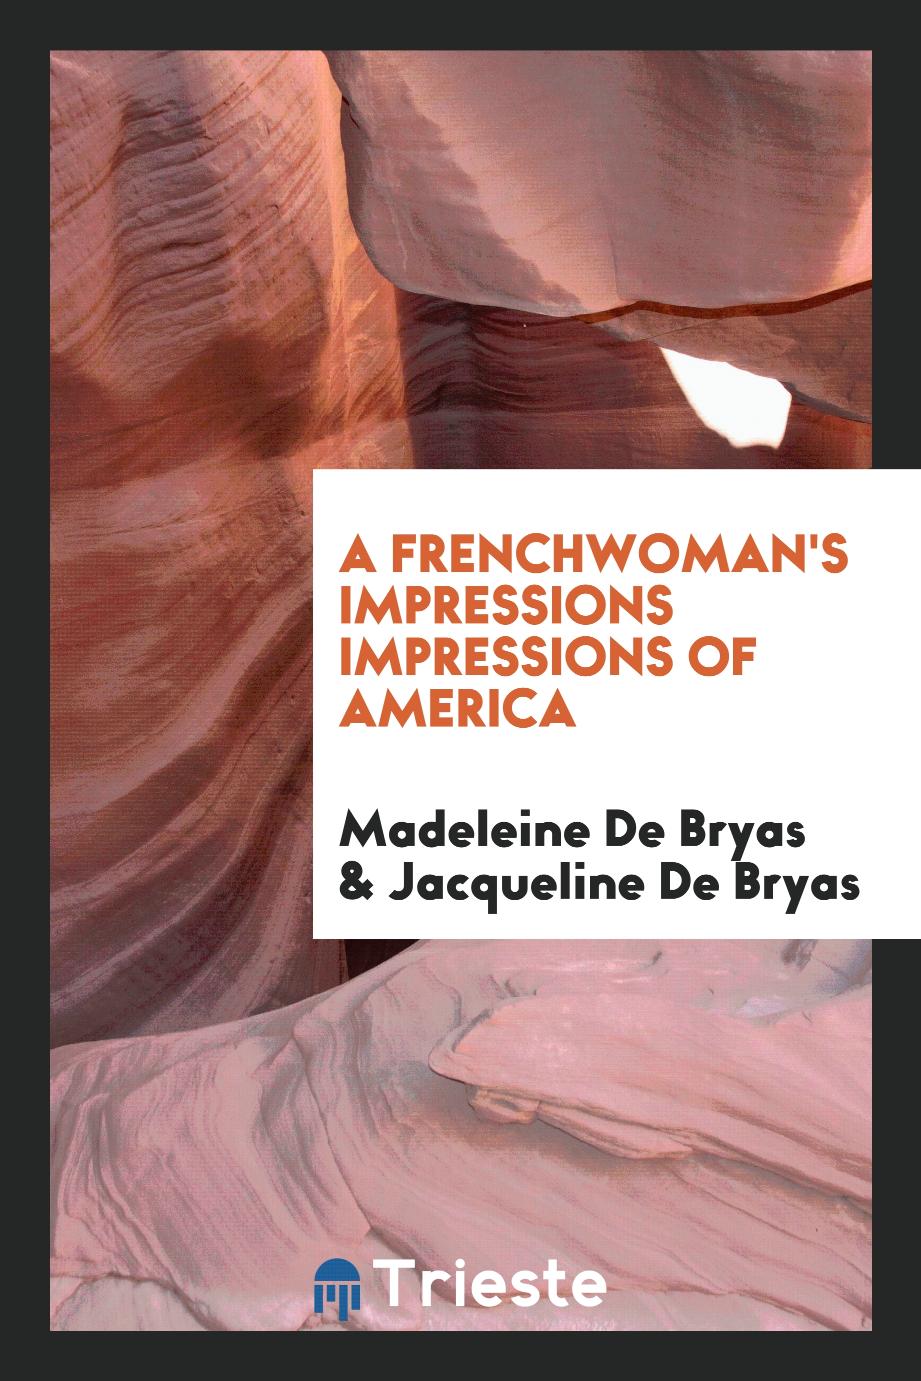 A Frenchwoman's impressions impressions of America